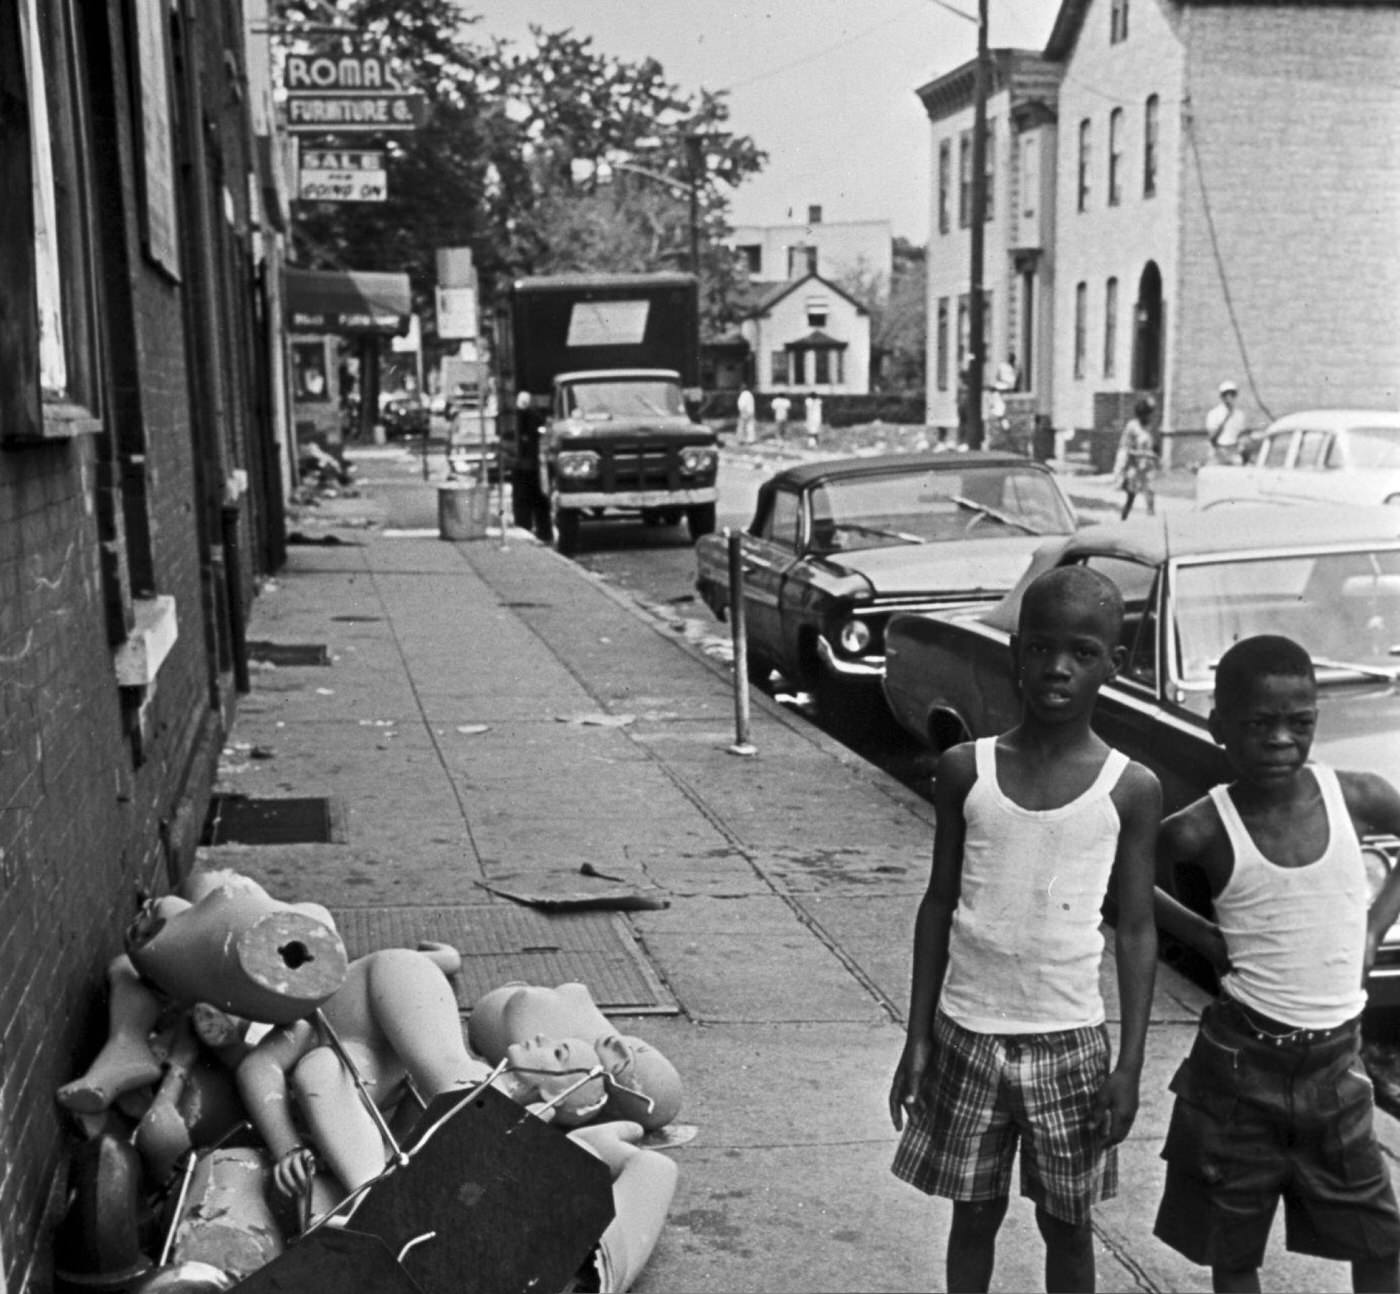 Two young African American boys in t-shirts and Bermuda shorts near broken mannequin busts on the sidewalk